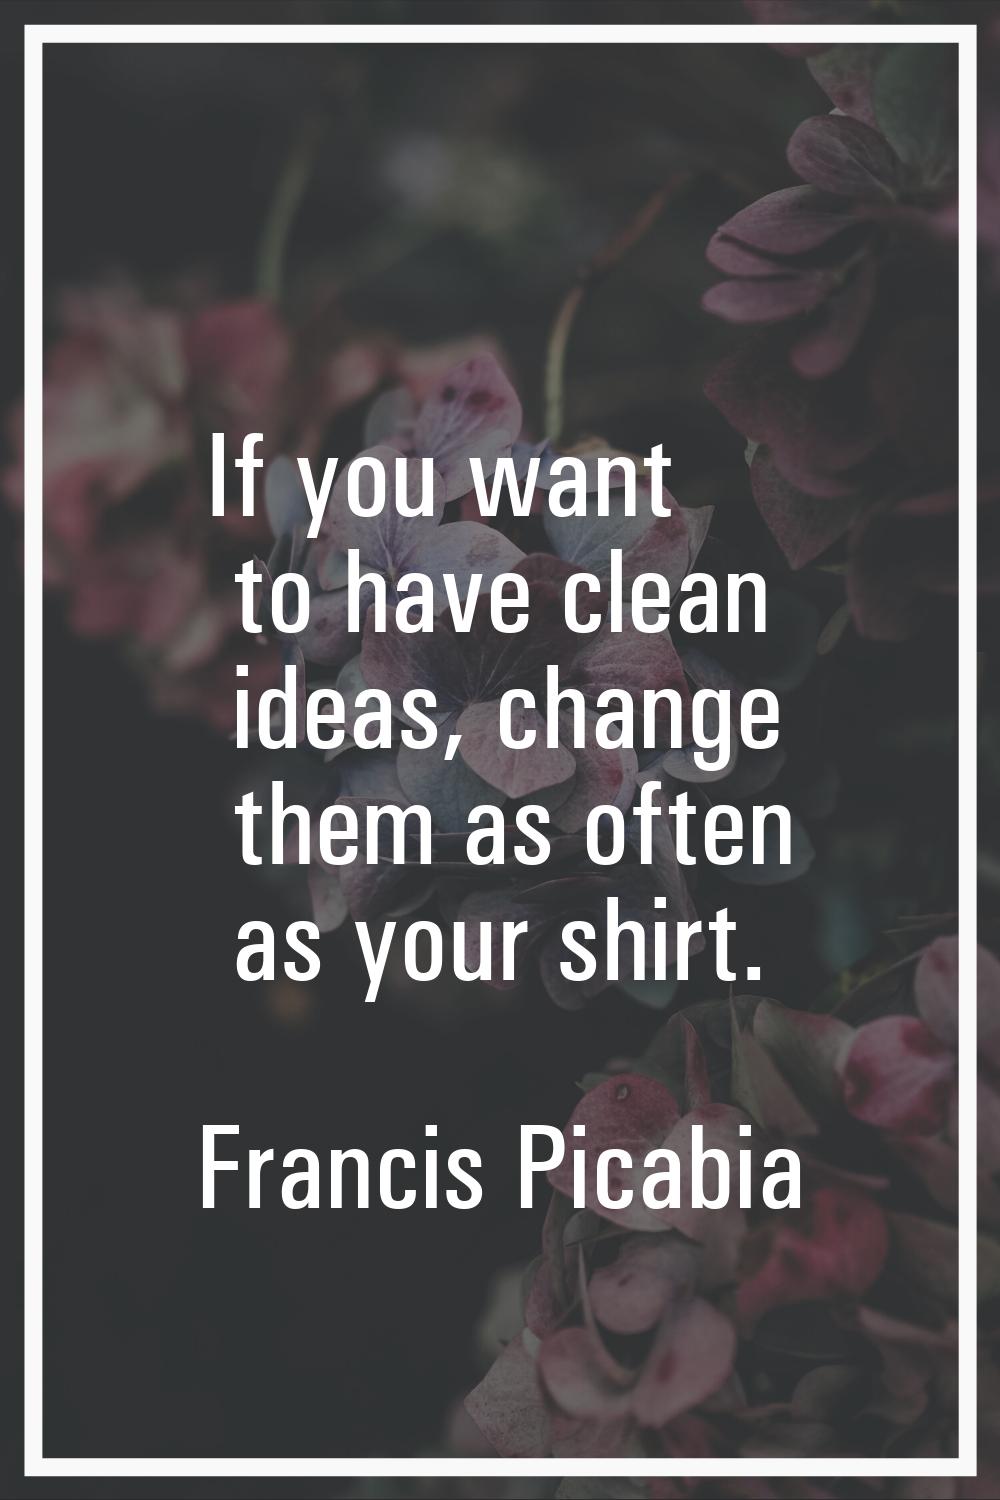 If you want to have clean ideas, change them as often as your shirt.